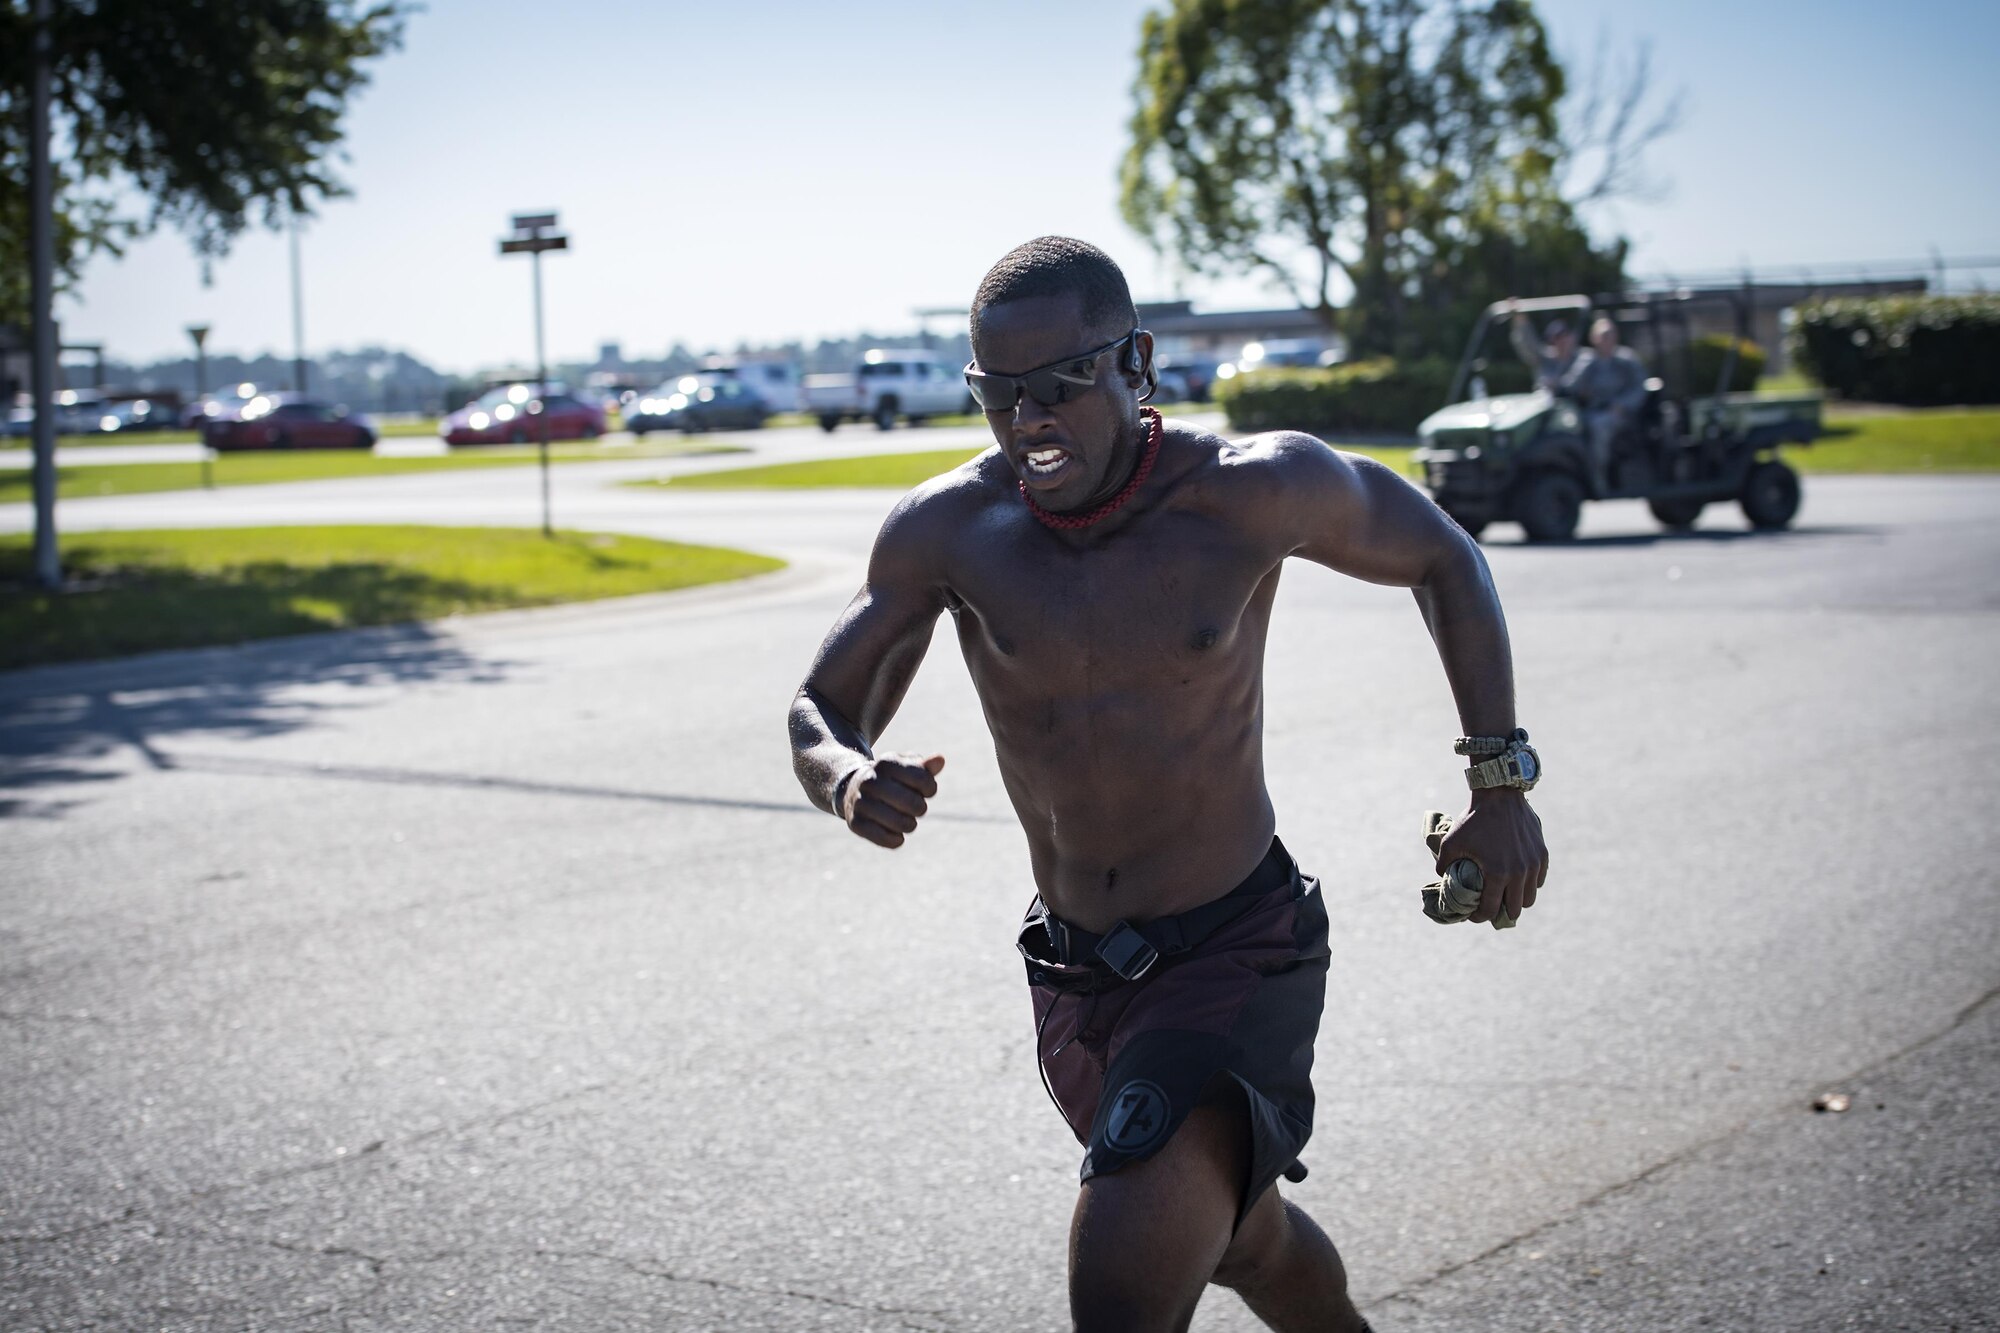 A competitor sprints the run portion of the Police Week Quadathalon, May 15, 2017, at Moody Air Force Base, Ga. Teams of four participated in a swim, run, bike and ruck march competition, where the team with the fastest time won bragging rights. Overall, Police Week is designed to honor the legacies fallen officers, both civilian and military, have left behind, but it also gives various sections within the law enforcement community an opportunity to train together in friendly competitions. (U.S. Air Force photo by Senior Airman Janiqua P. Robinson)